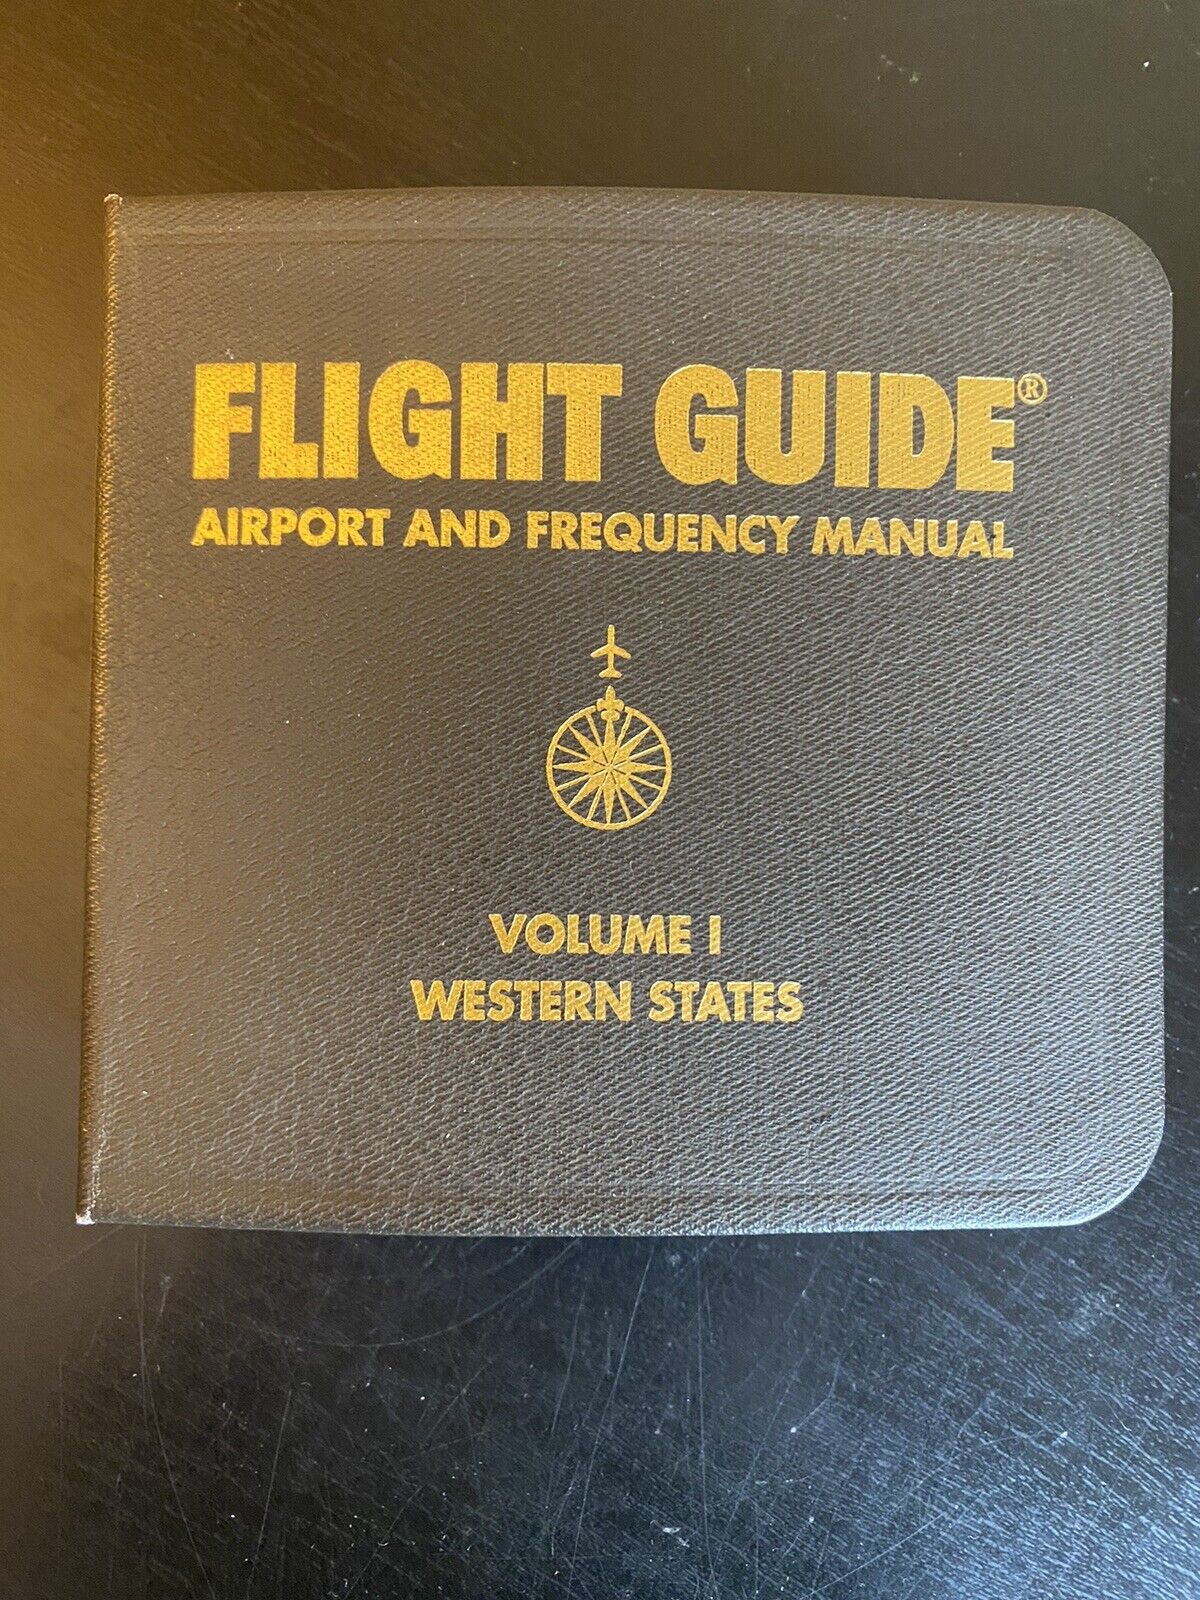 FLIGHT GUIDE Airport And Frequency Manual Volume 1-Western States